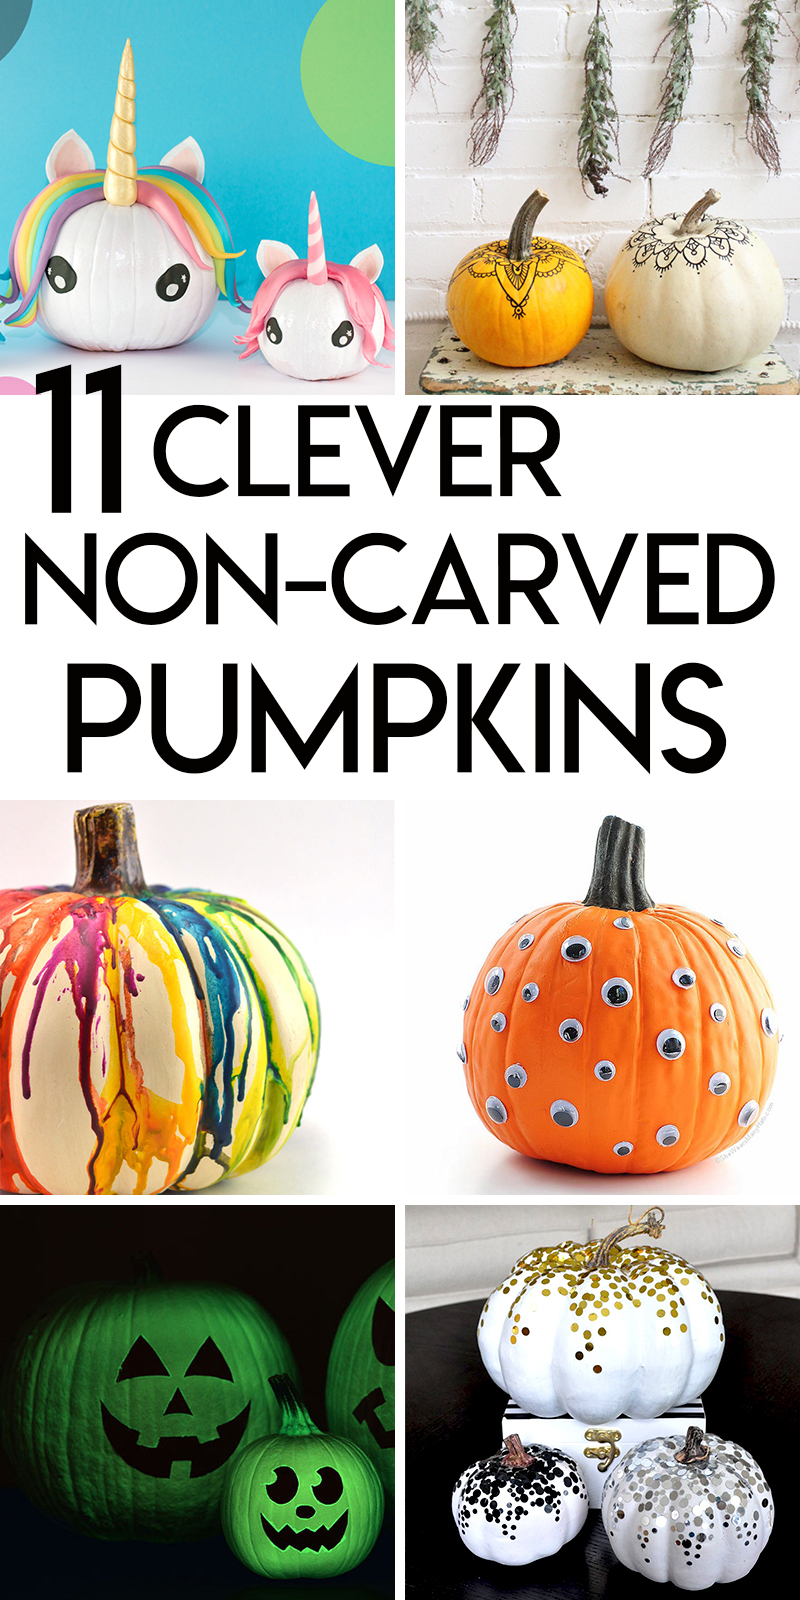 11 Clever Non-Carved Pumpkin Ideas for Halloween | Random Acts of Crafts